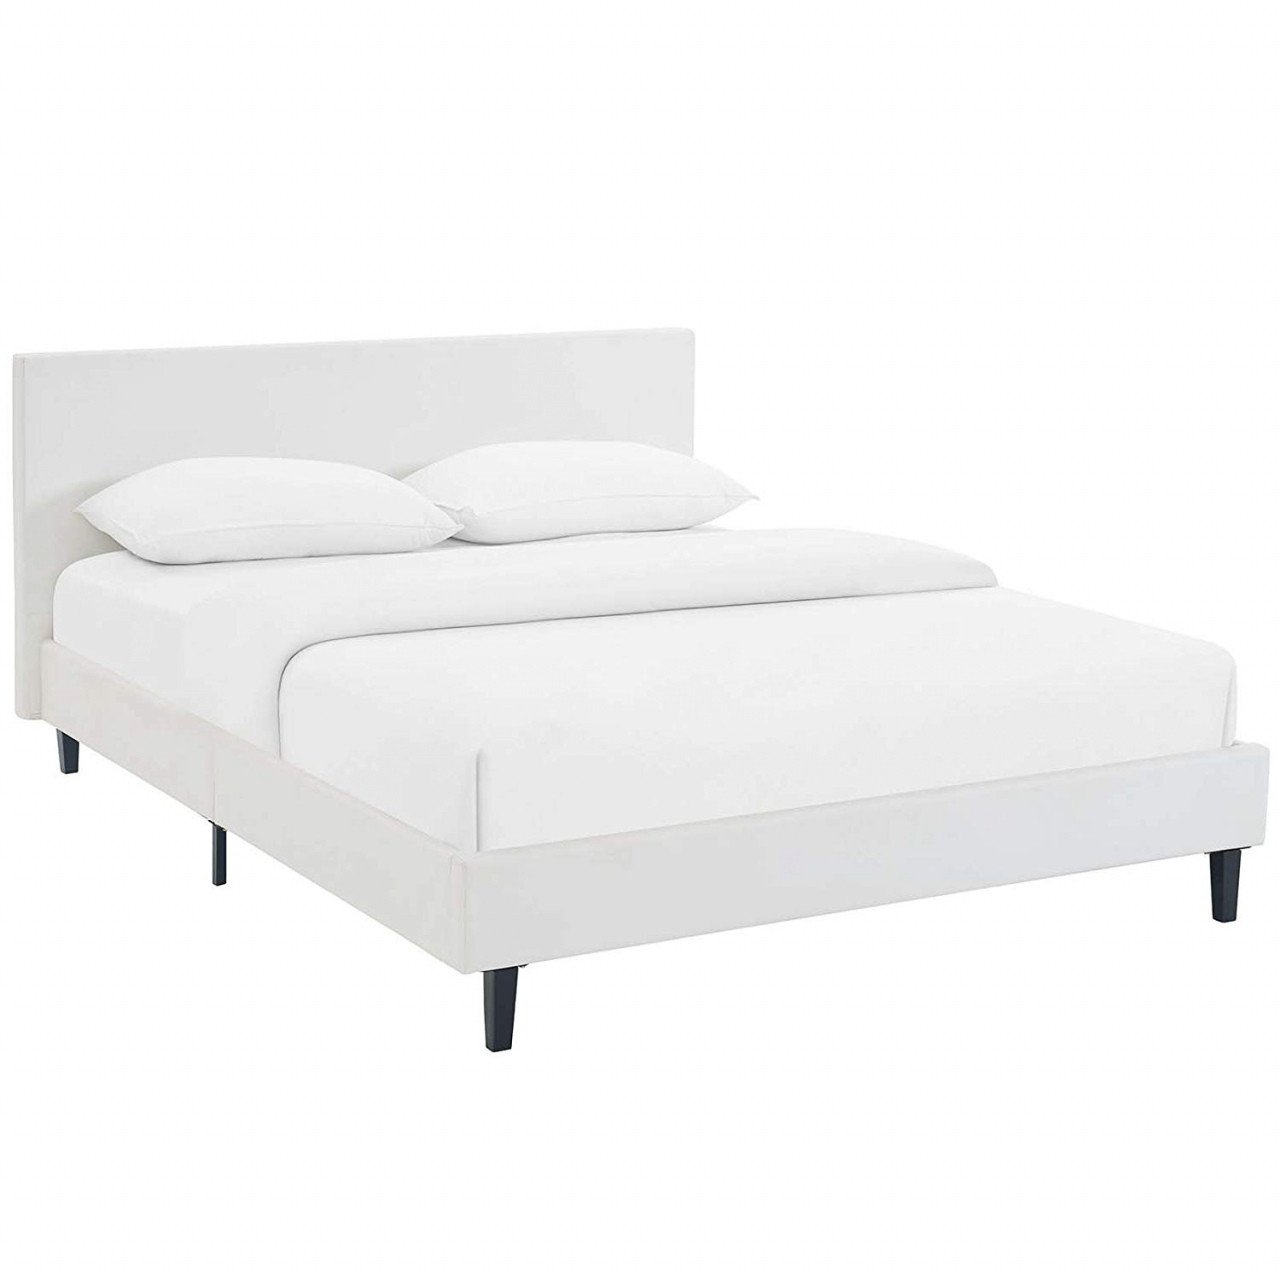 White Tufted Bedroom Set Beautiful White Queen Platform Bed — Procura Home Blog